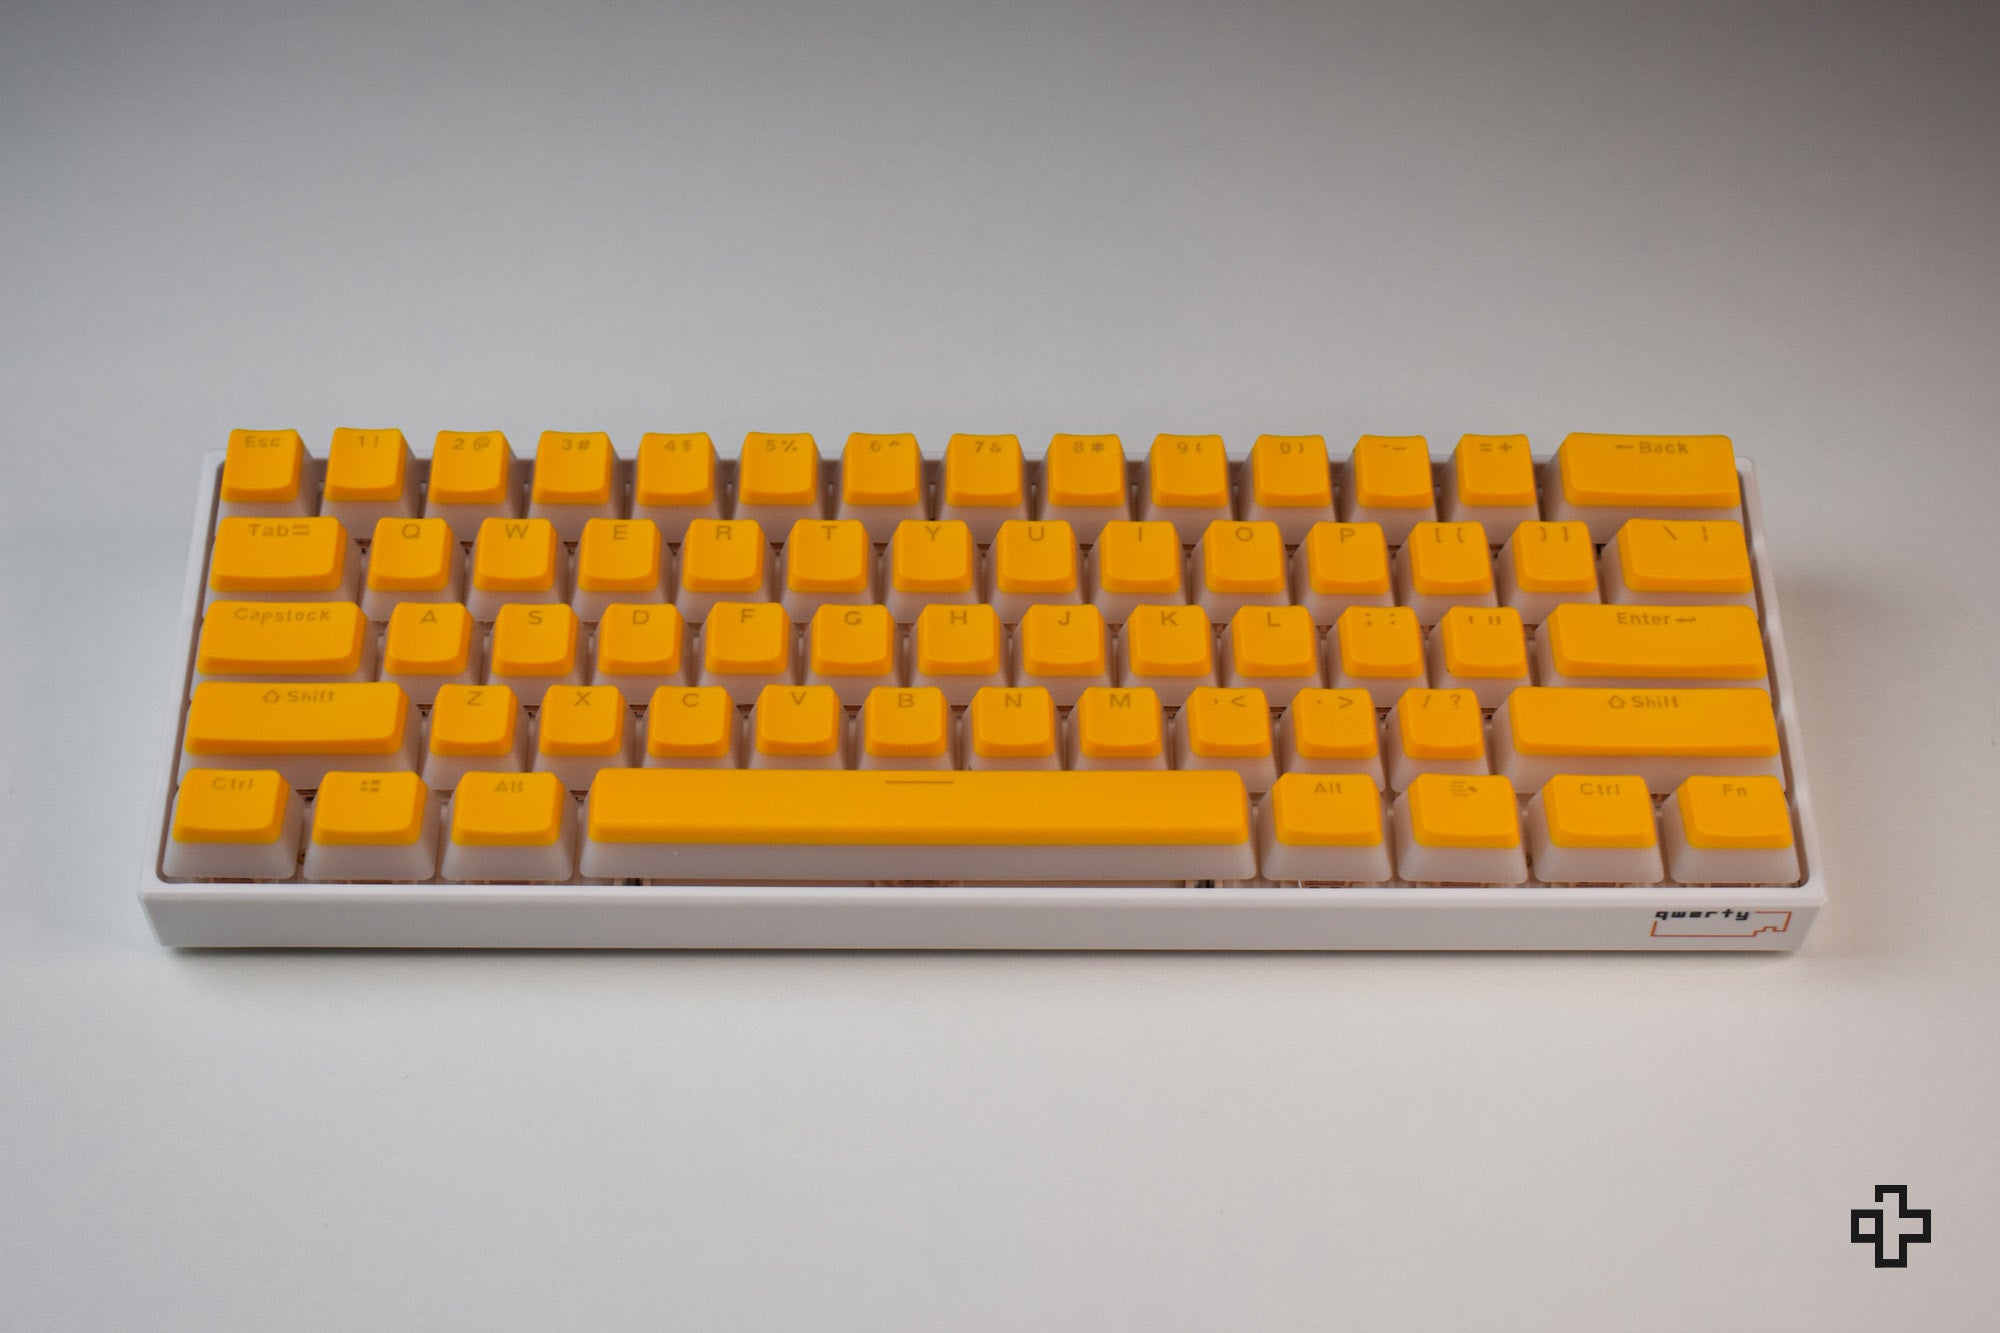 Set Taste Yellow Pudding Profil OEM Material PBT Double Shot - QwertyKey